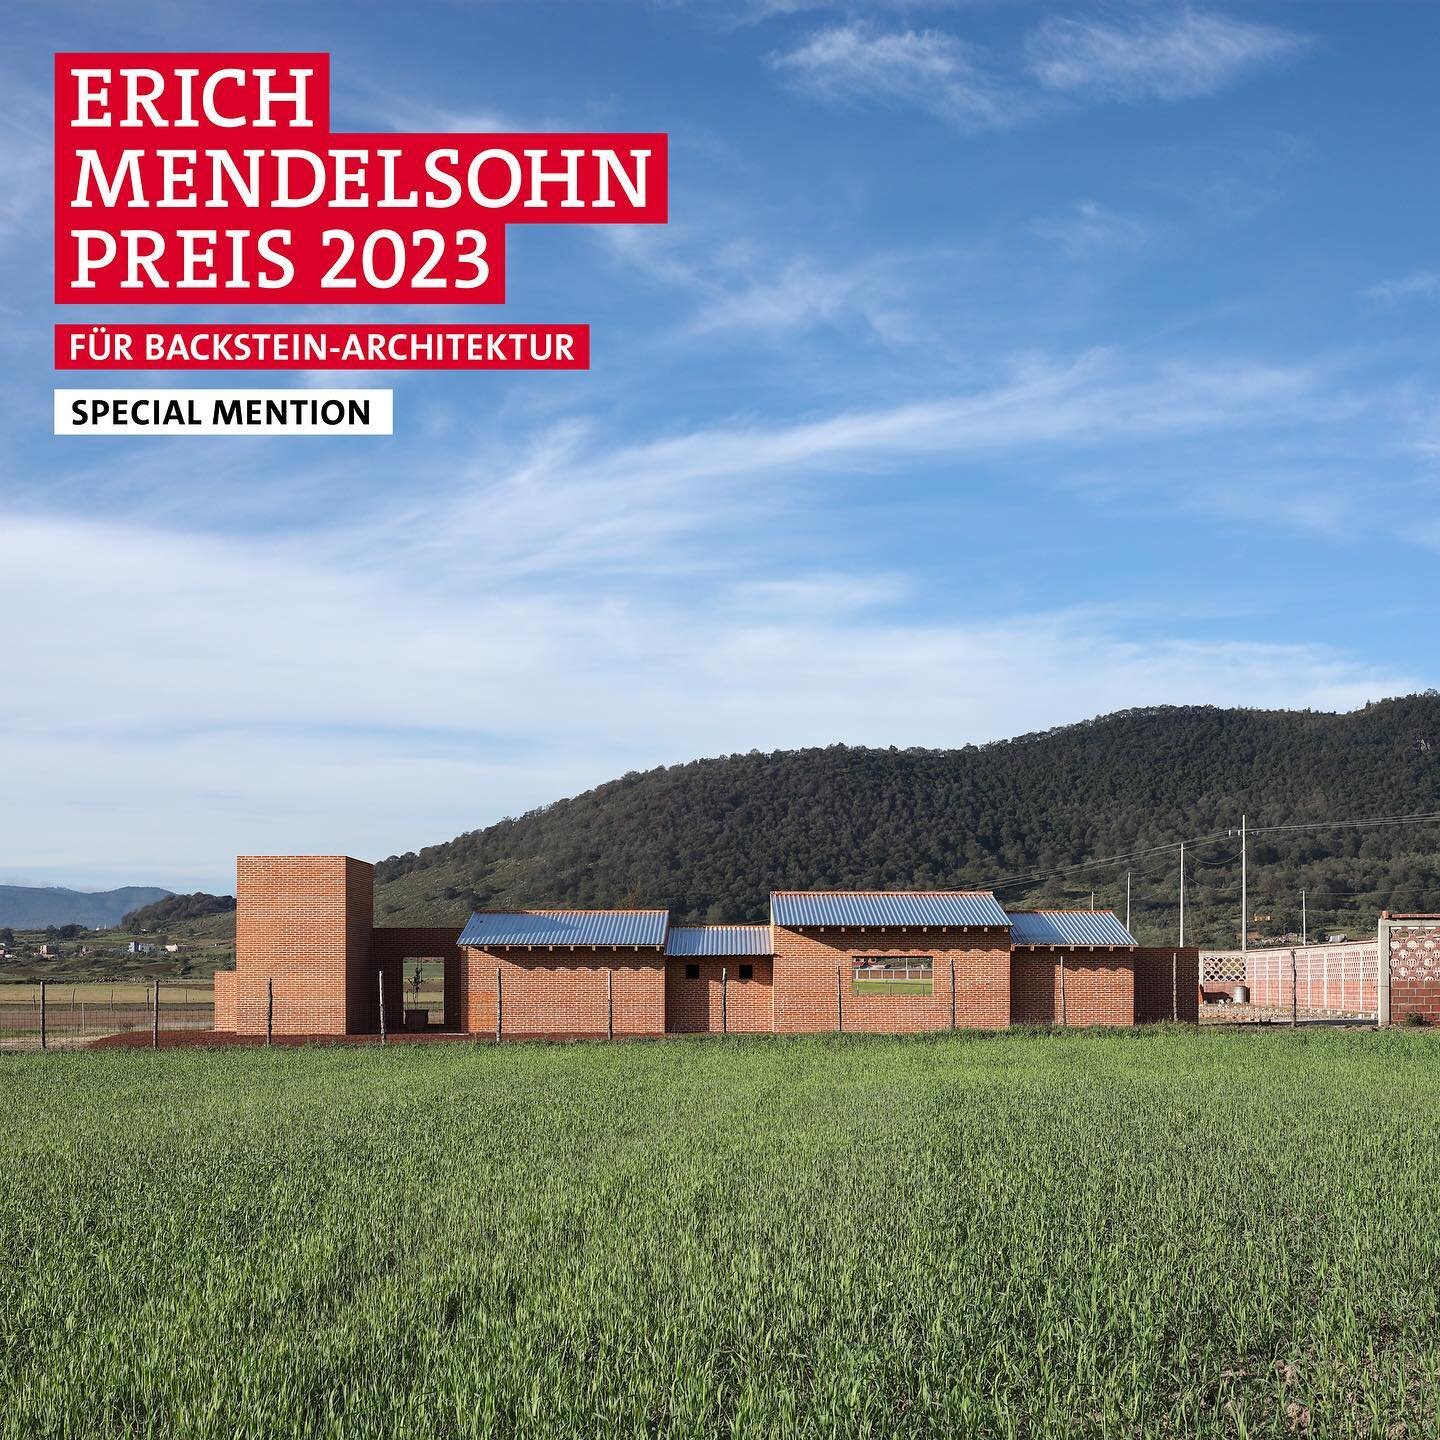 We are extremely happy to share that our project, House in Singuilucan (076a), was recognized with a Special Mention in the Detached House/Semi-Detached House category of the Erich Mendelsohn Preis 2023. 

The Award for Brick Architecture has been aw